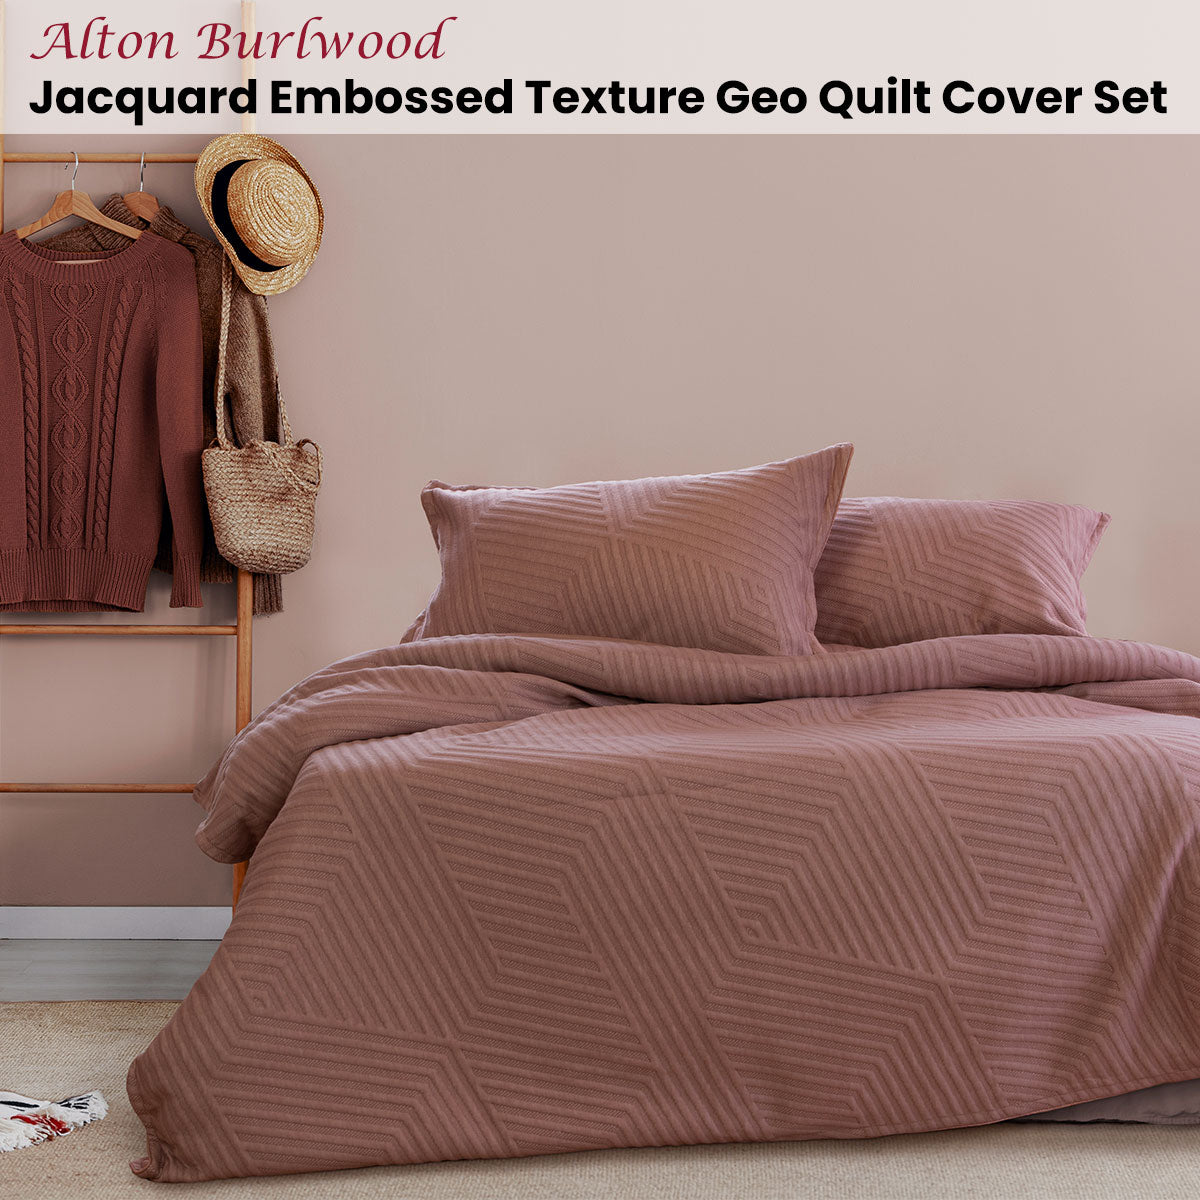 KING Jacquard Embossed Texture Geo Quilt Cover Set - Pink